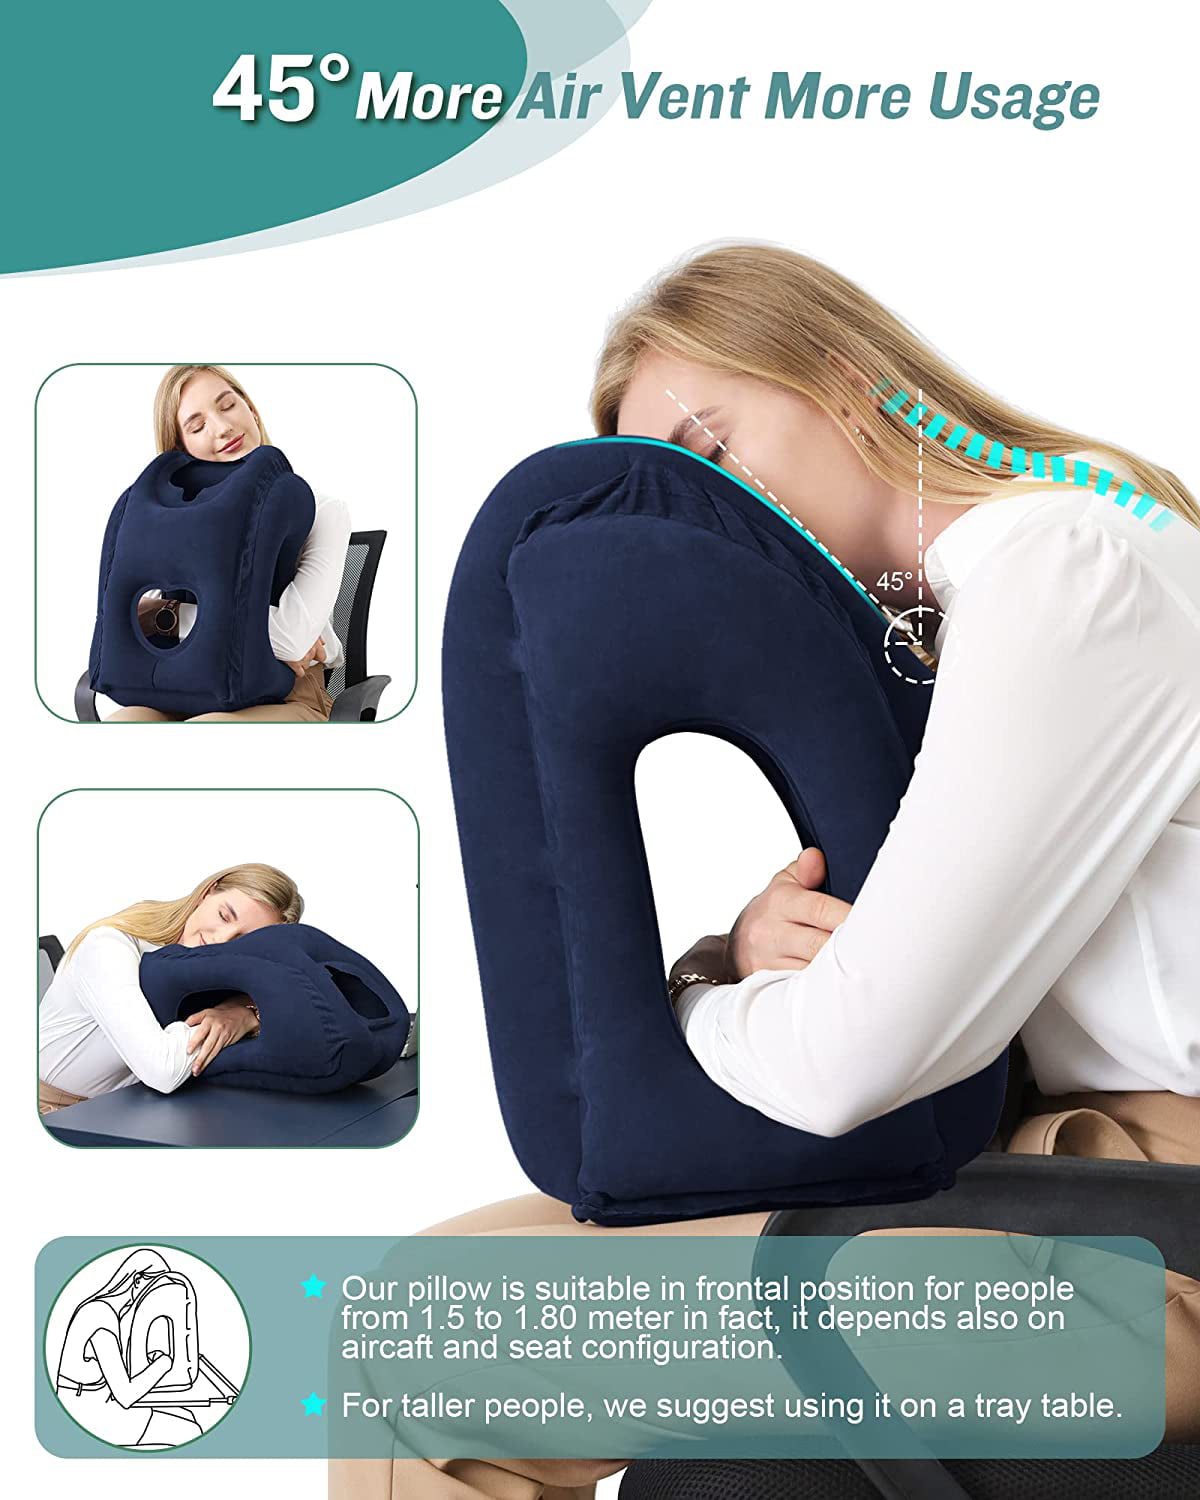 KINSCO Inflatable Travel Pillow，Airplane Neck Pillow for Airplane, Train,  car Backseat, Office Lunch Break, Provides You a Comfortable Sleeping